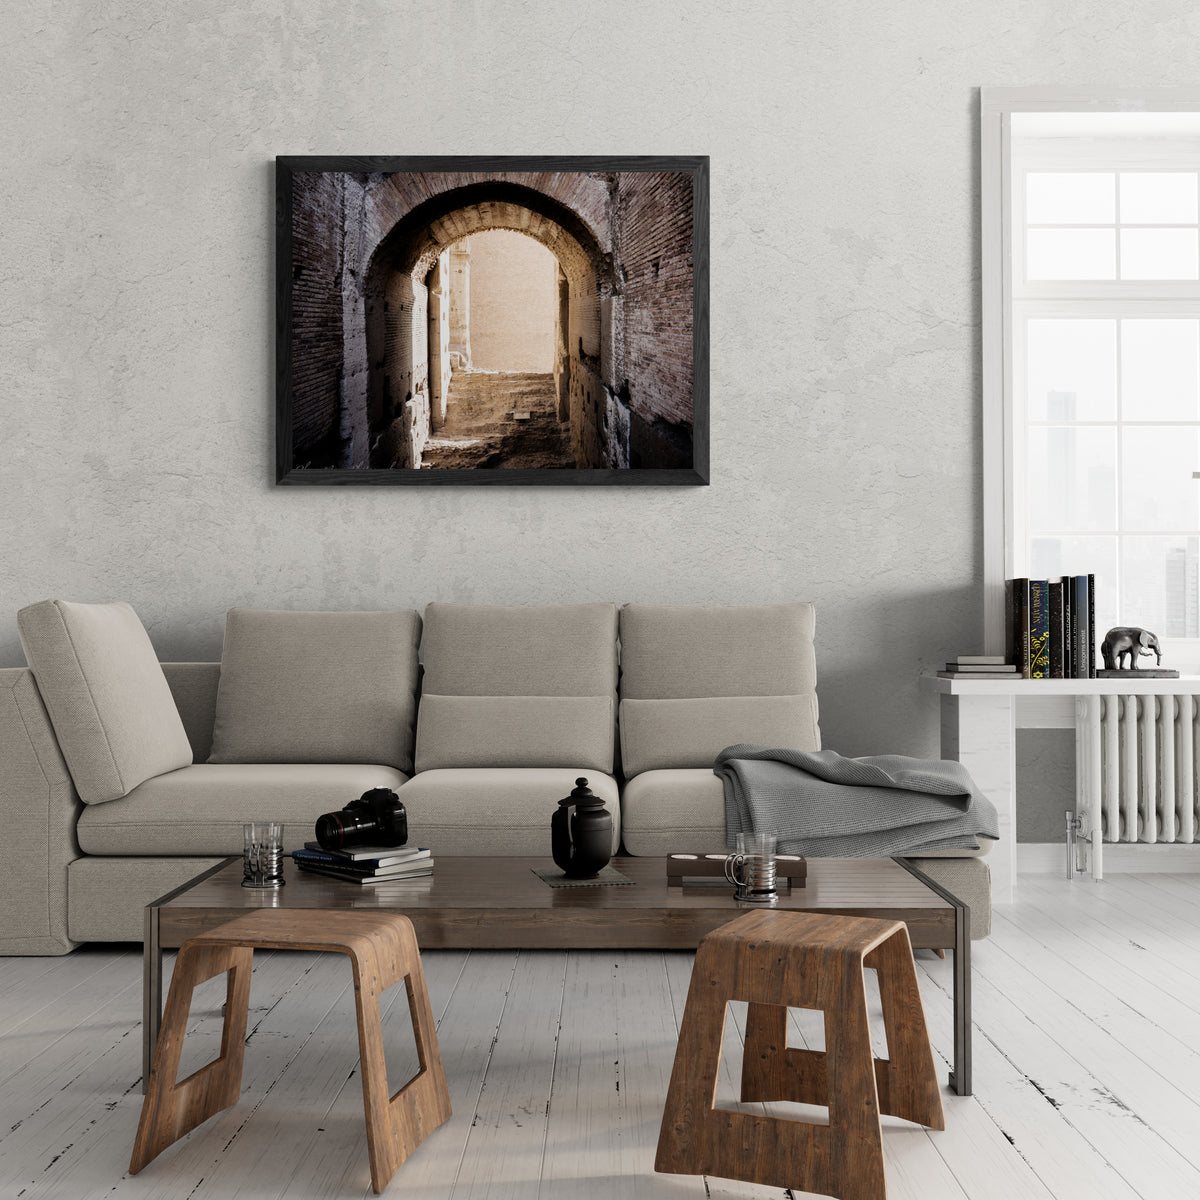  print displayed on wall in living room